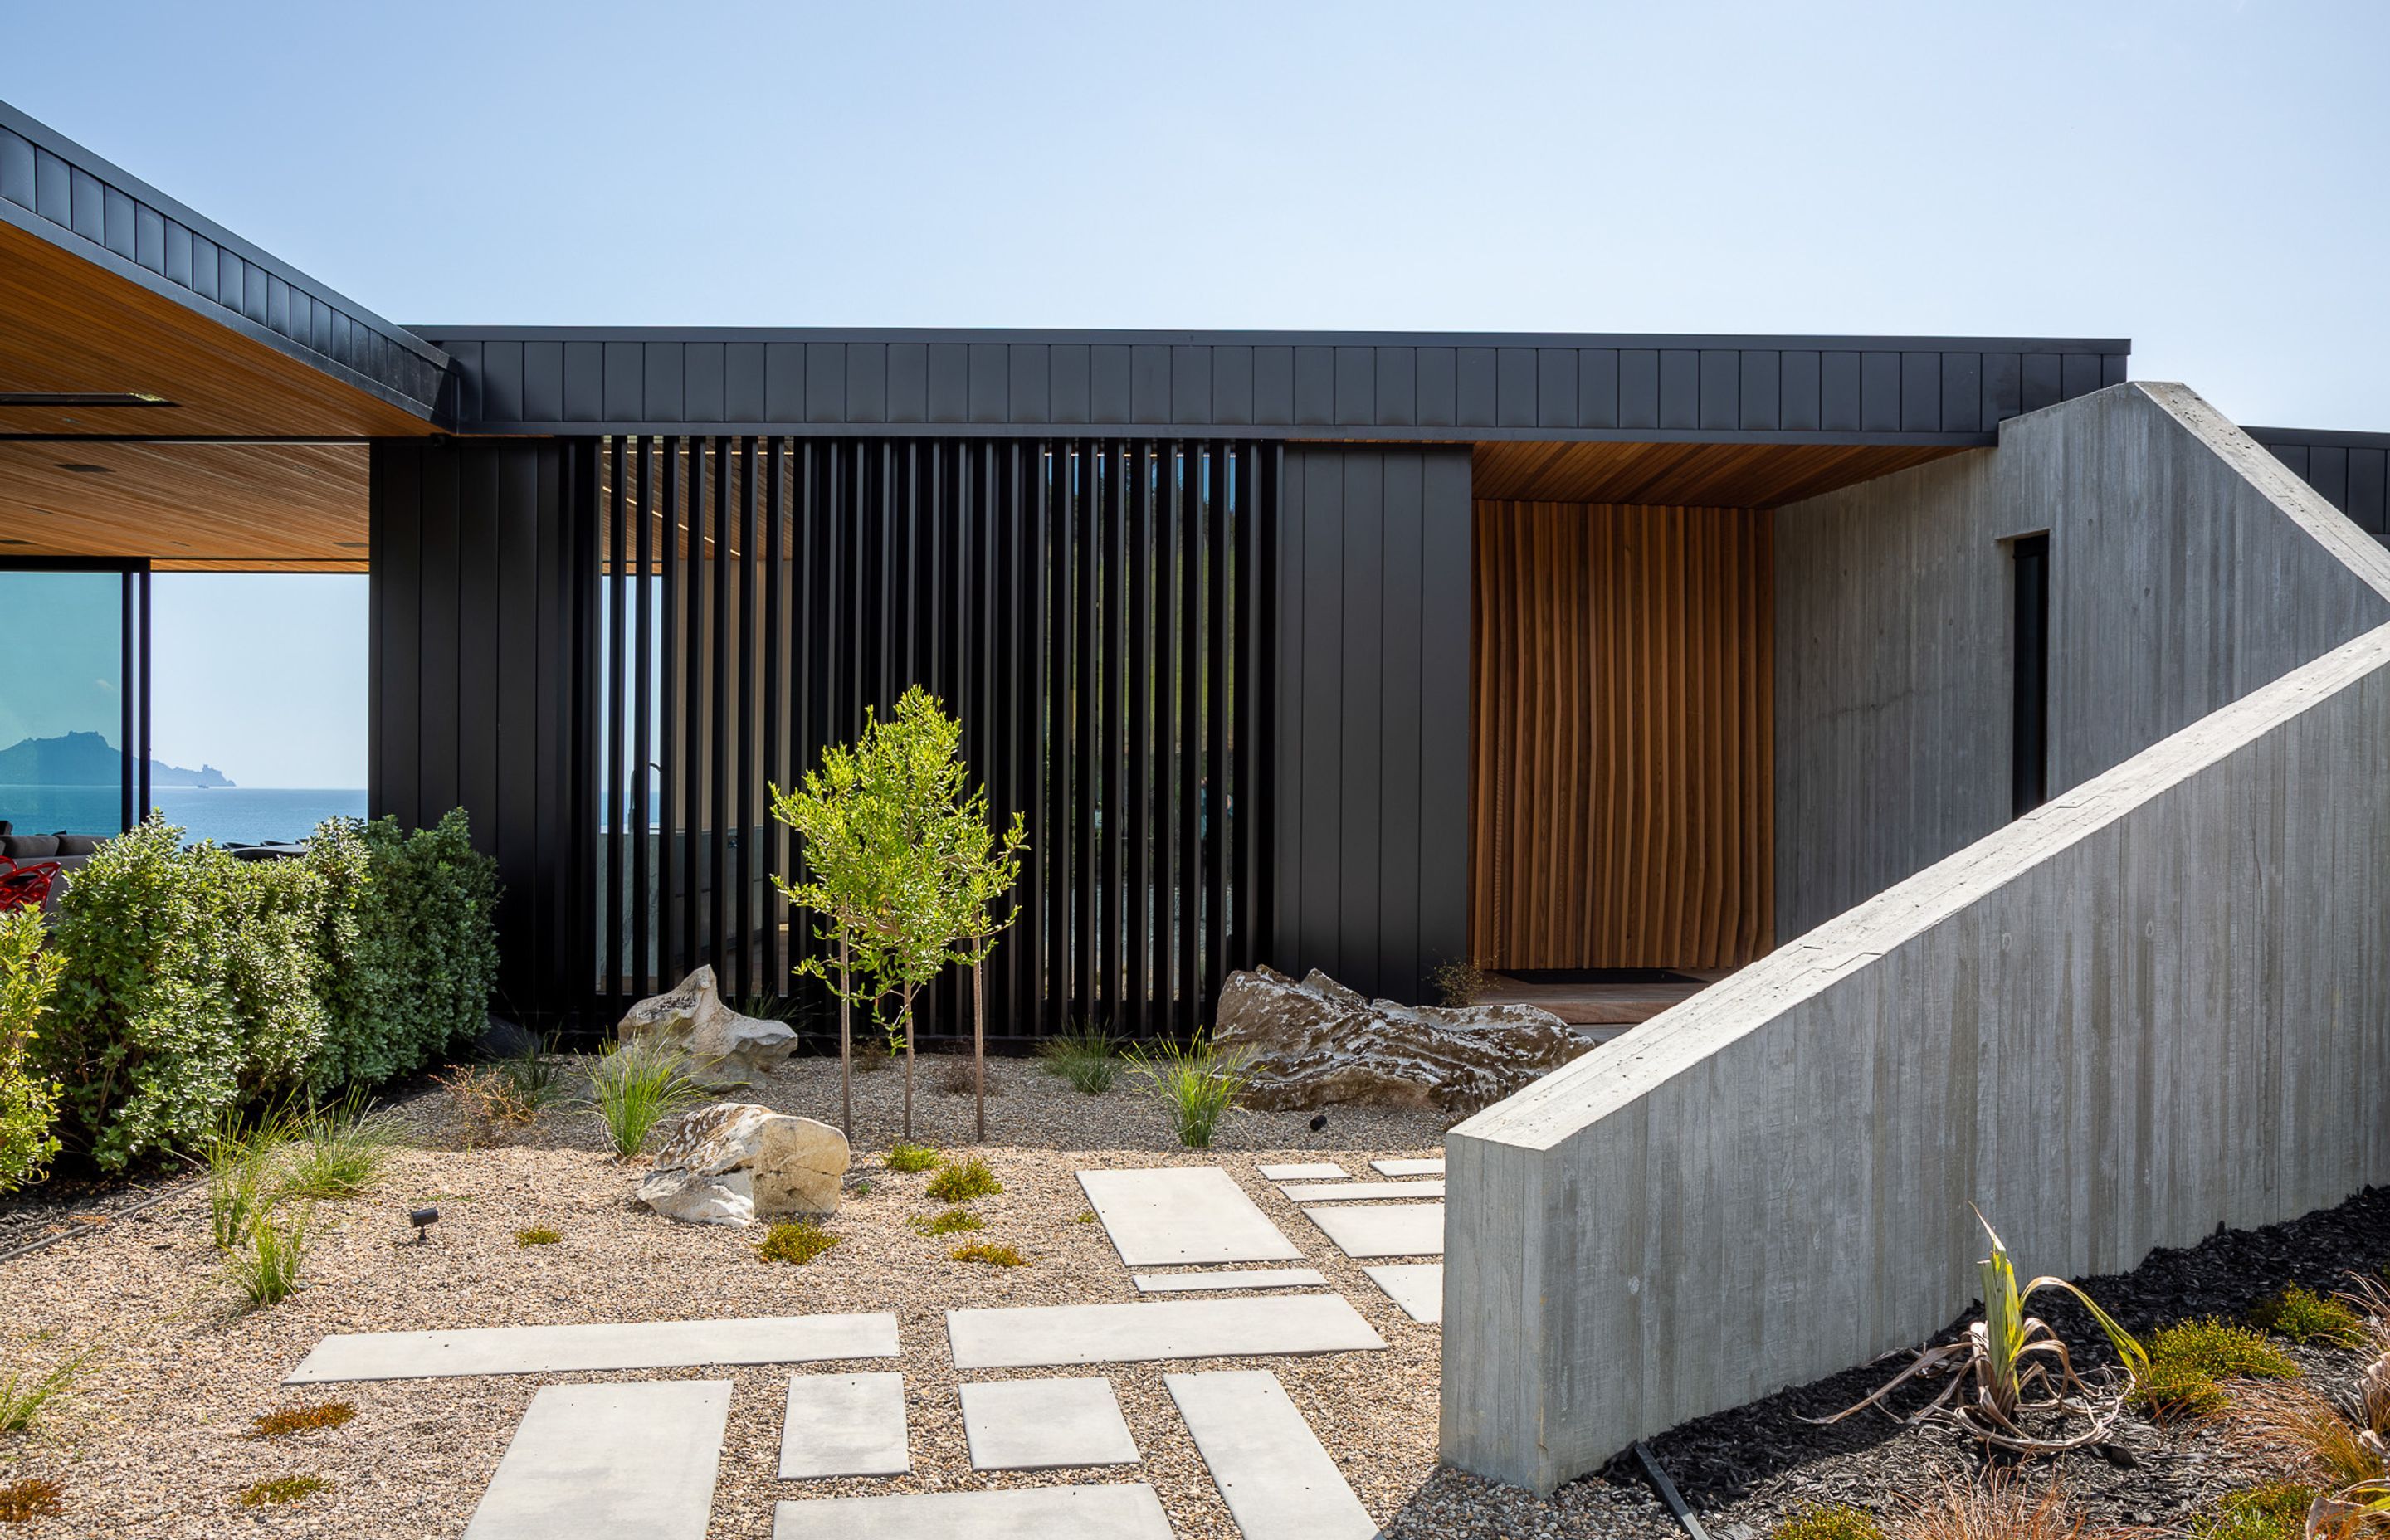 The in situ concrete wall and cedar and aluminium fins that define the entry set the angular theme that is seen in the rest of the house, particularly in the striking gabled ends of the two wings.